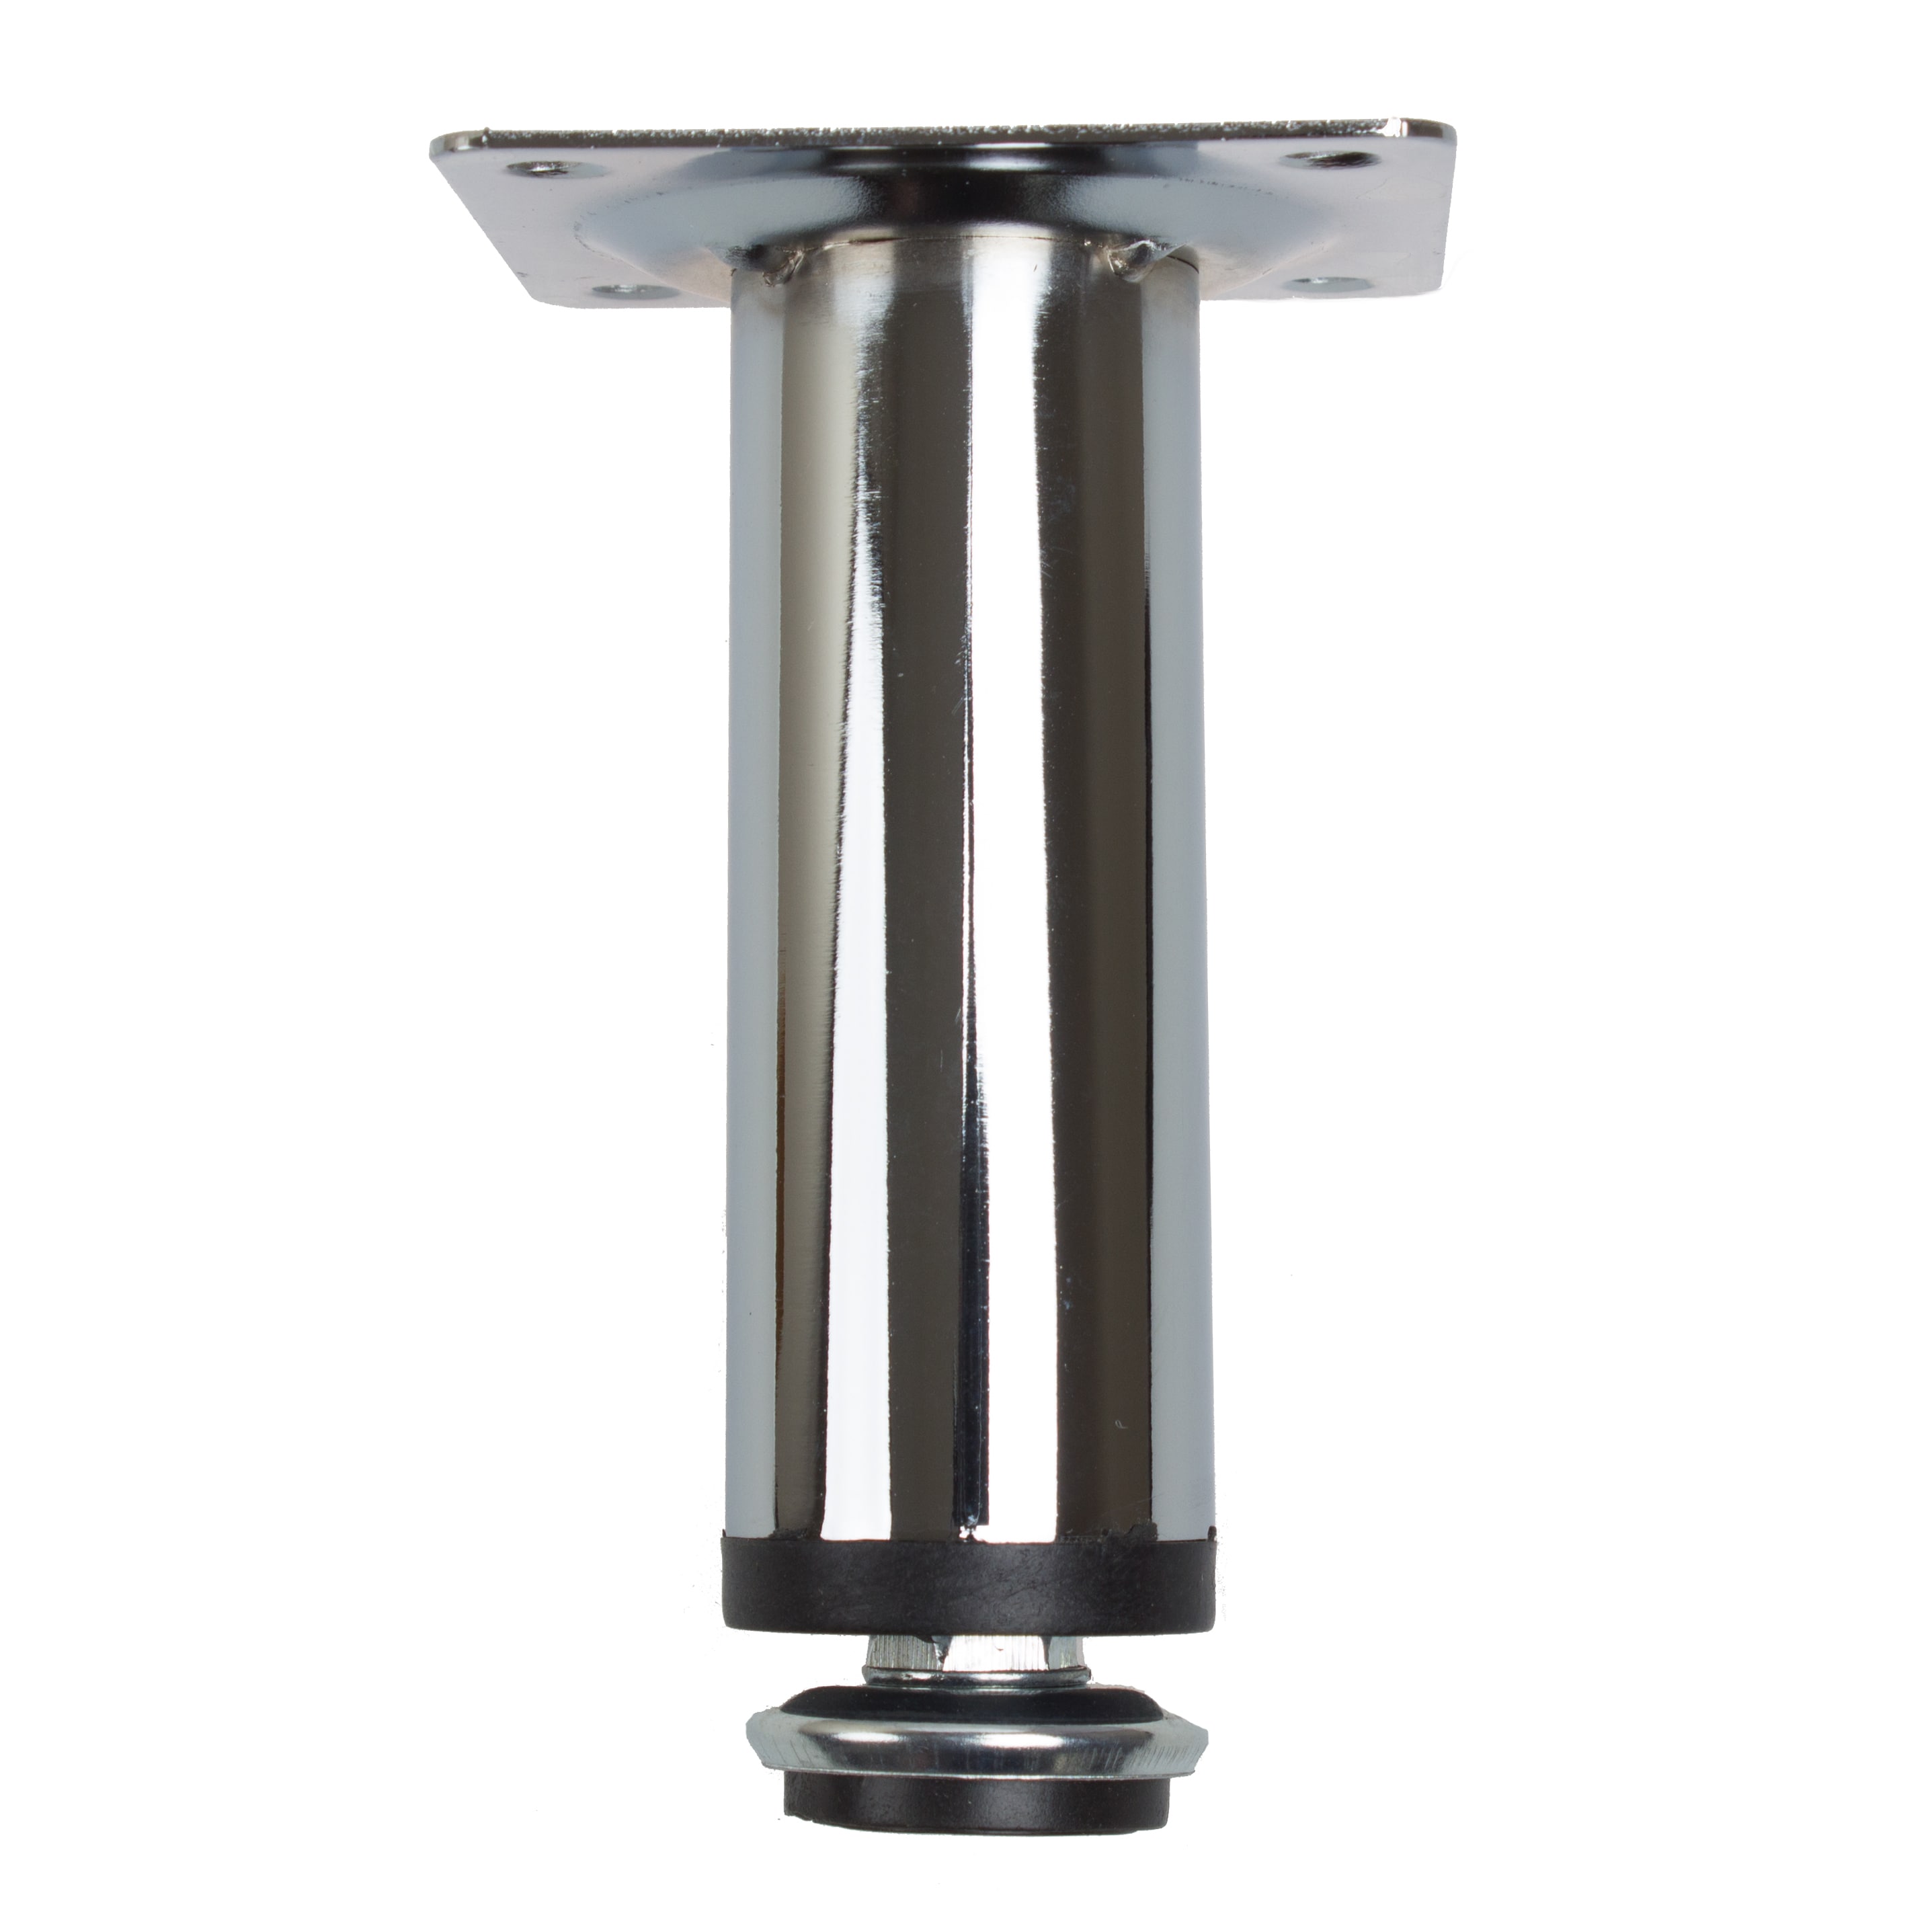 Shop Gliderite Steel Furniture Legs With Leveling Screw Polished